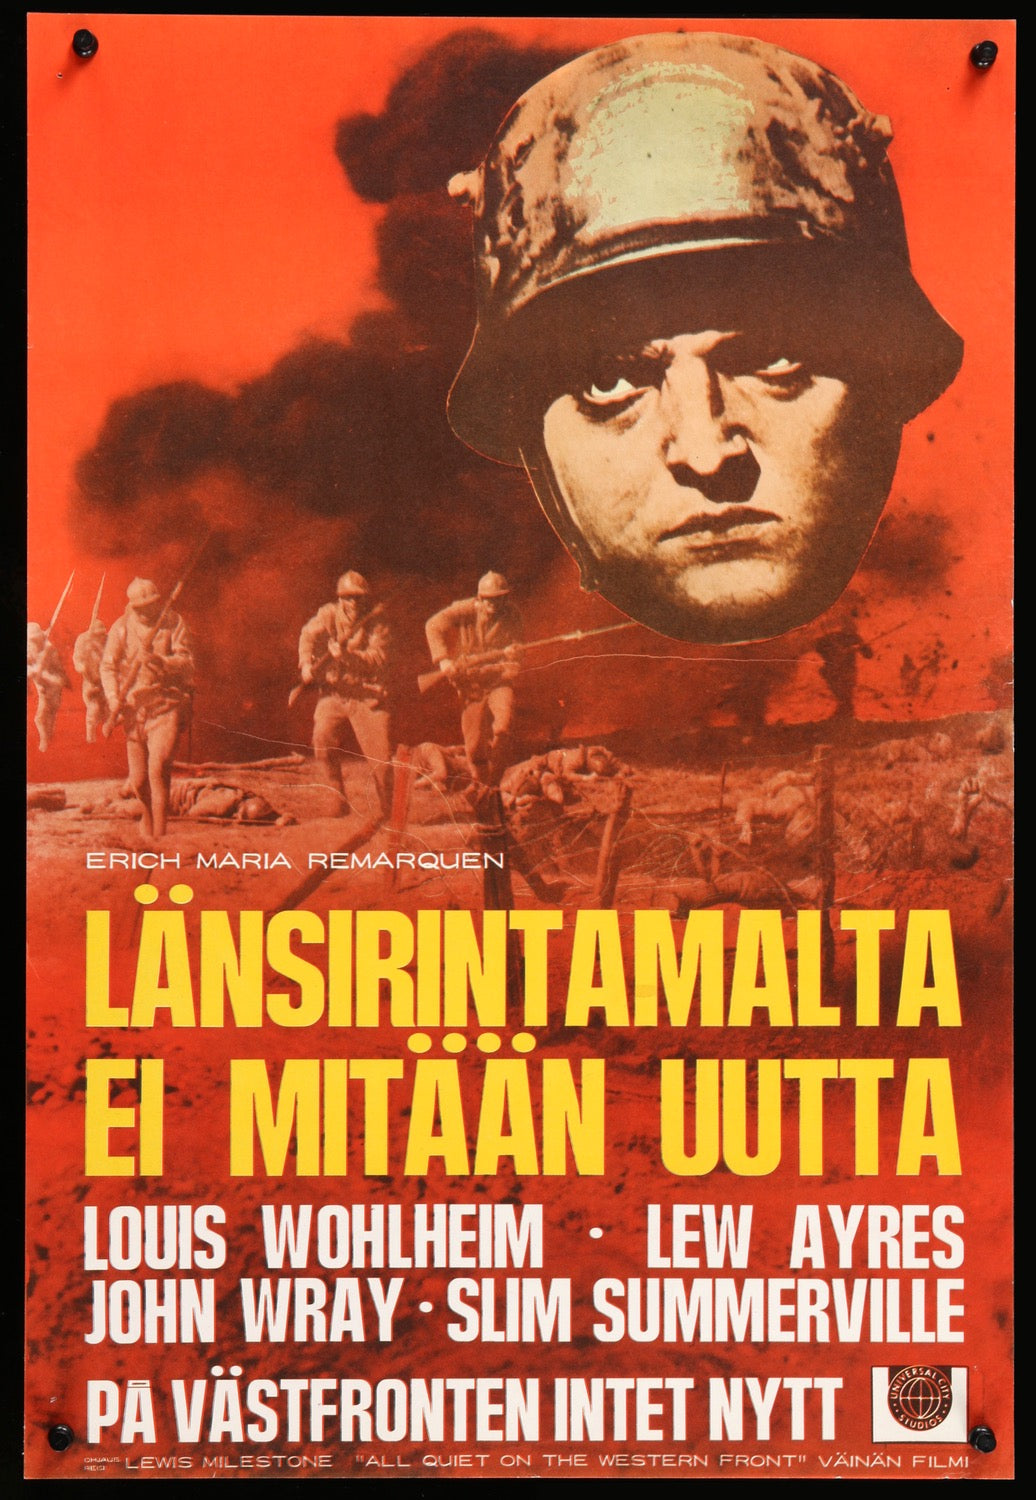 All Quiet on the Western Front (1930) original movie poster for sale at Original Film Art